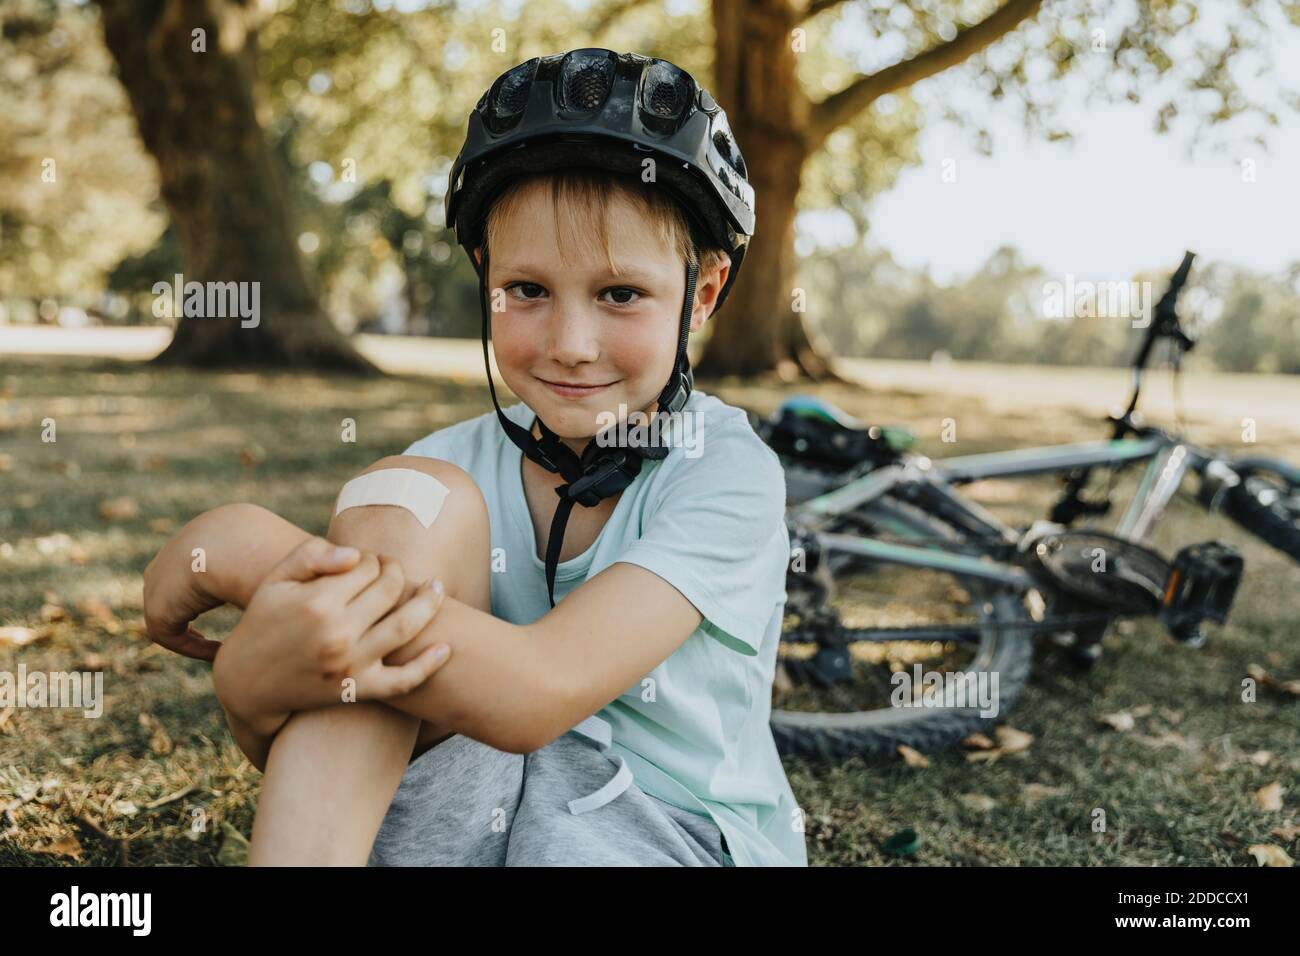 Boy sitting with bandage on knee in pubic park on sunny day Stock Photo